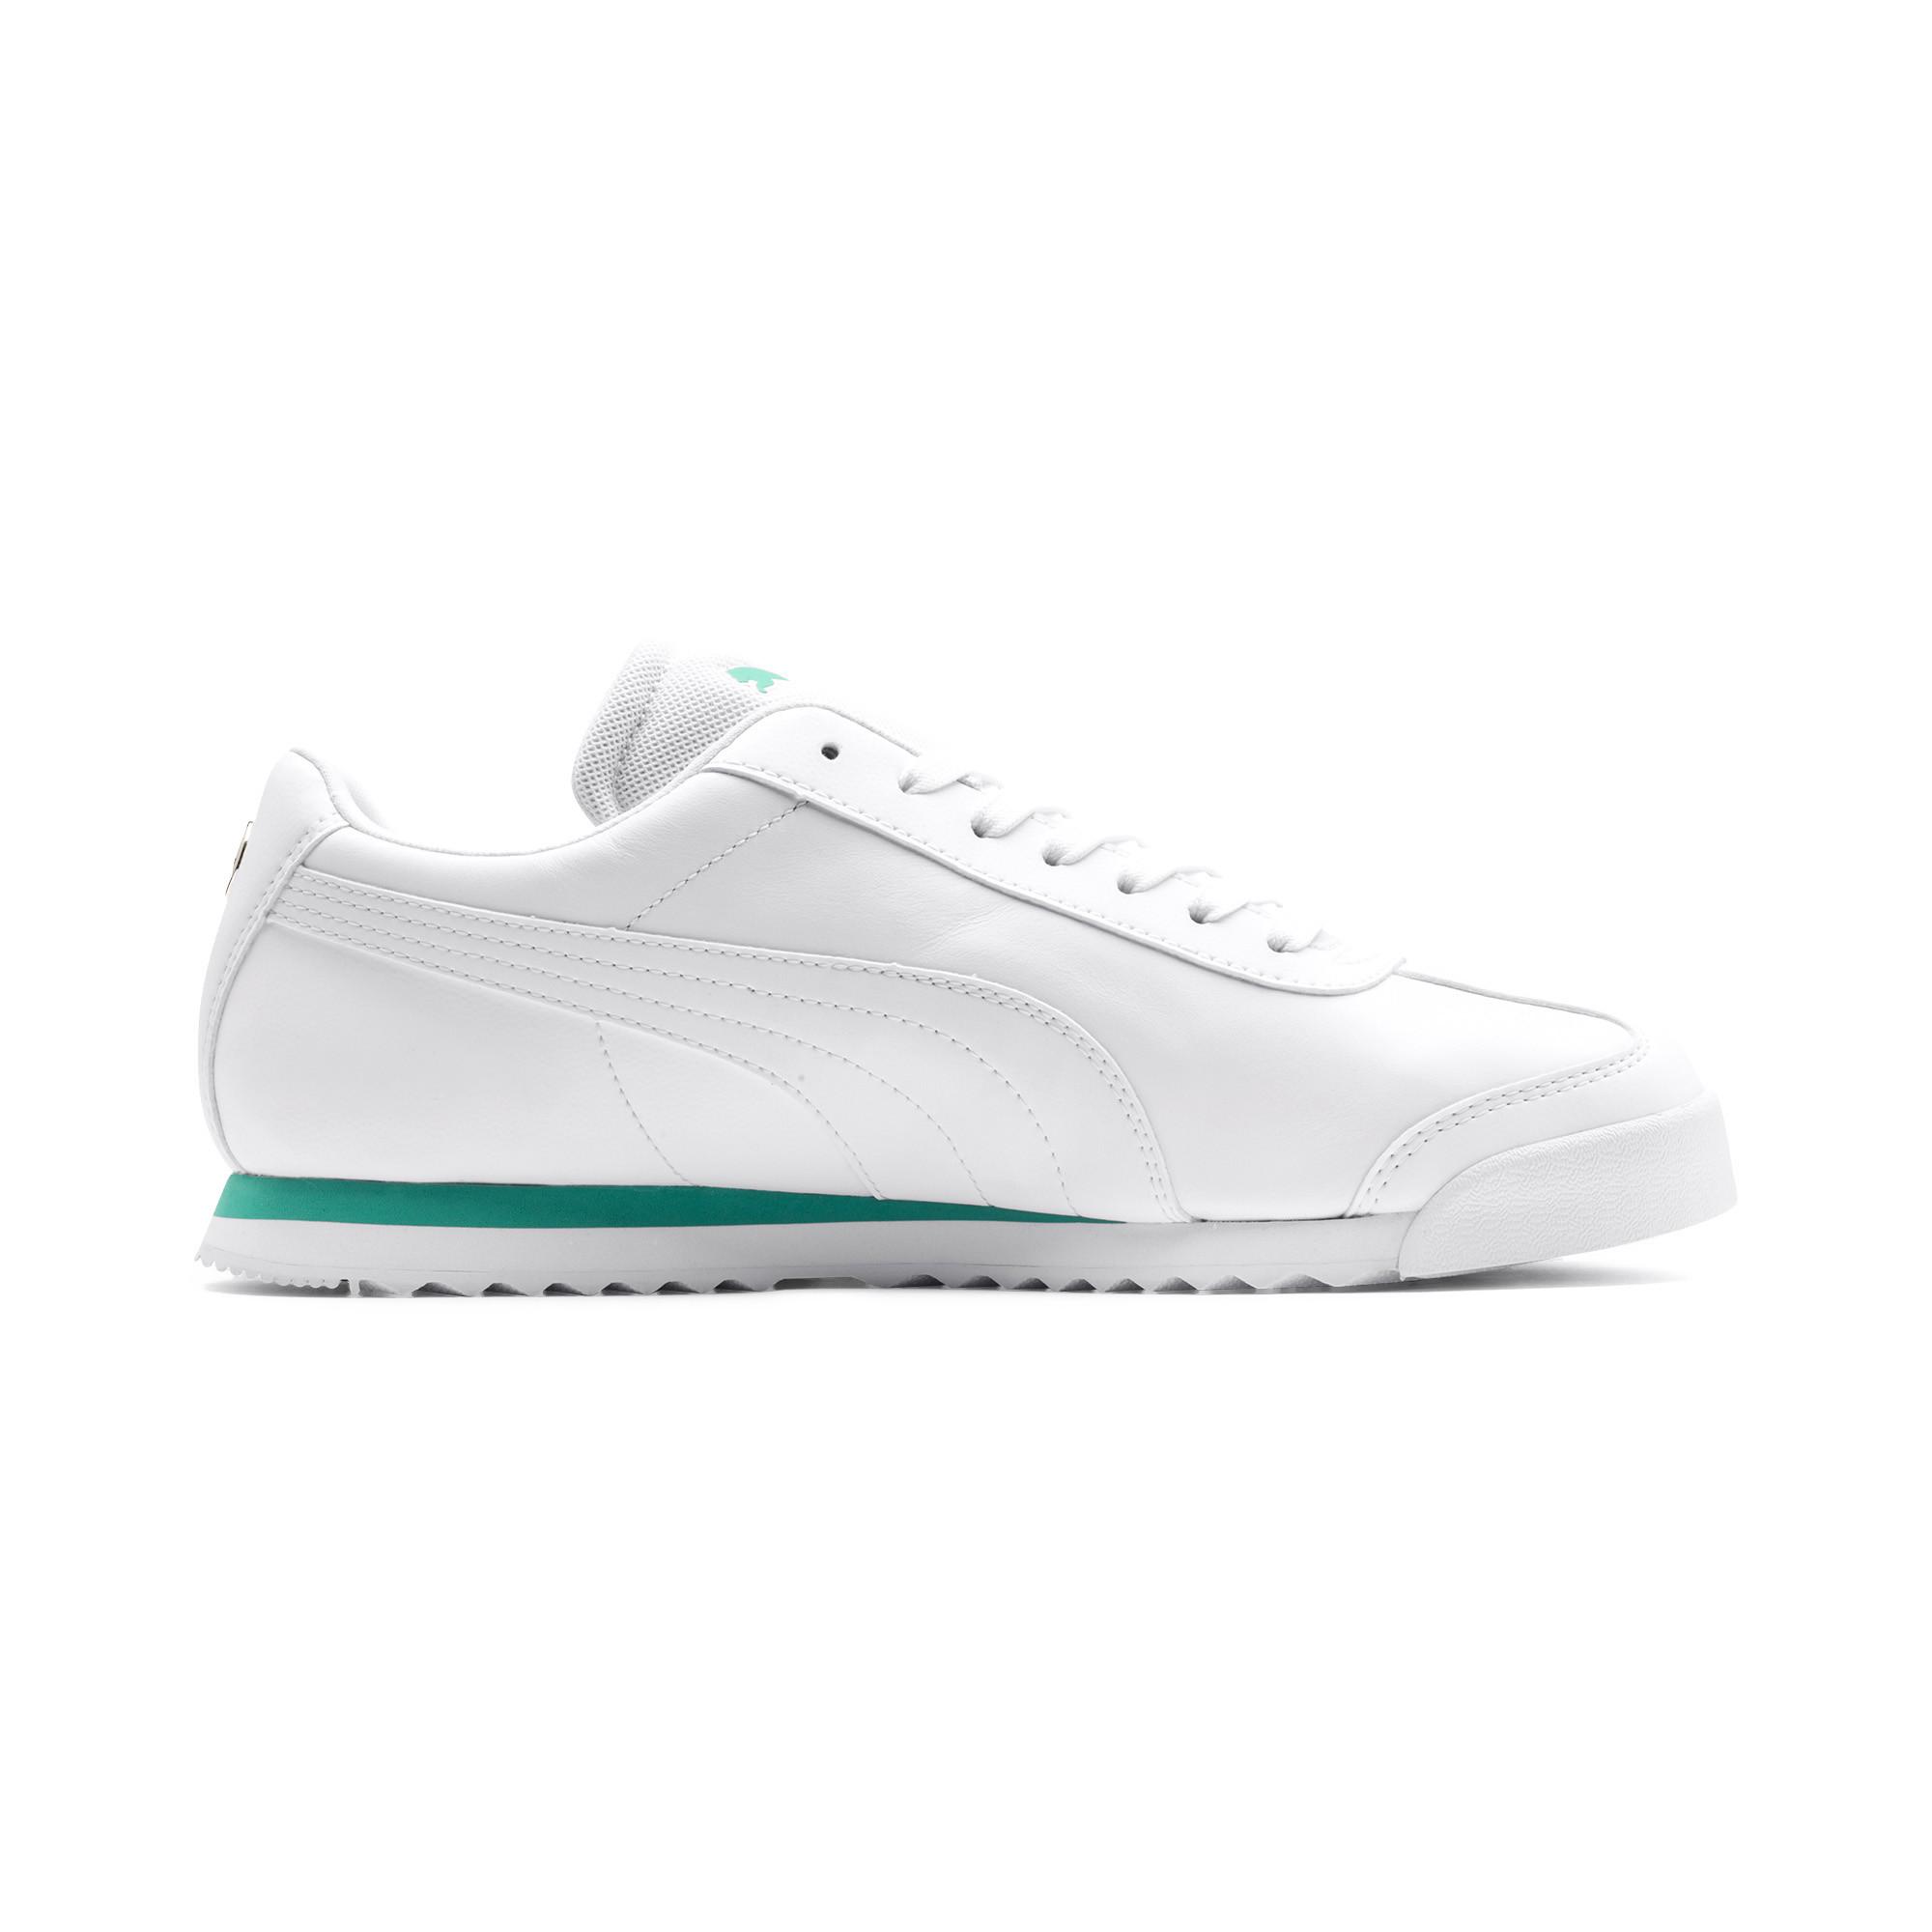 PUMA Leather Mercedes Amg Petronas Roma Men's Sneakers in 02 (White ...